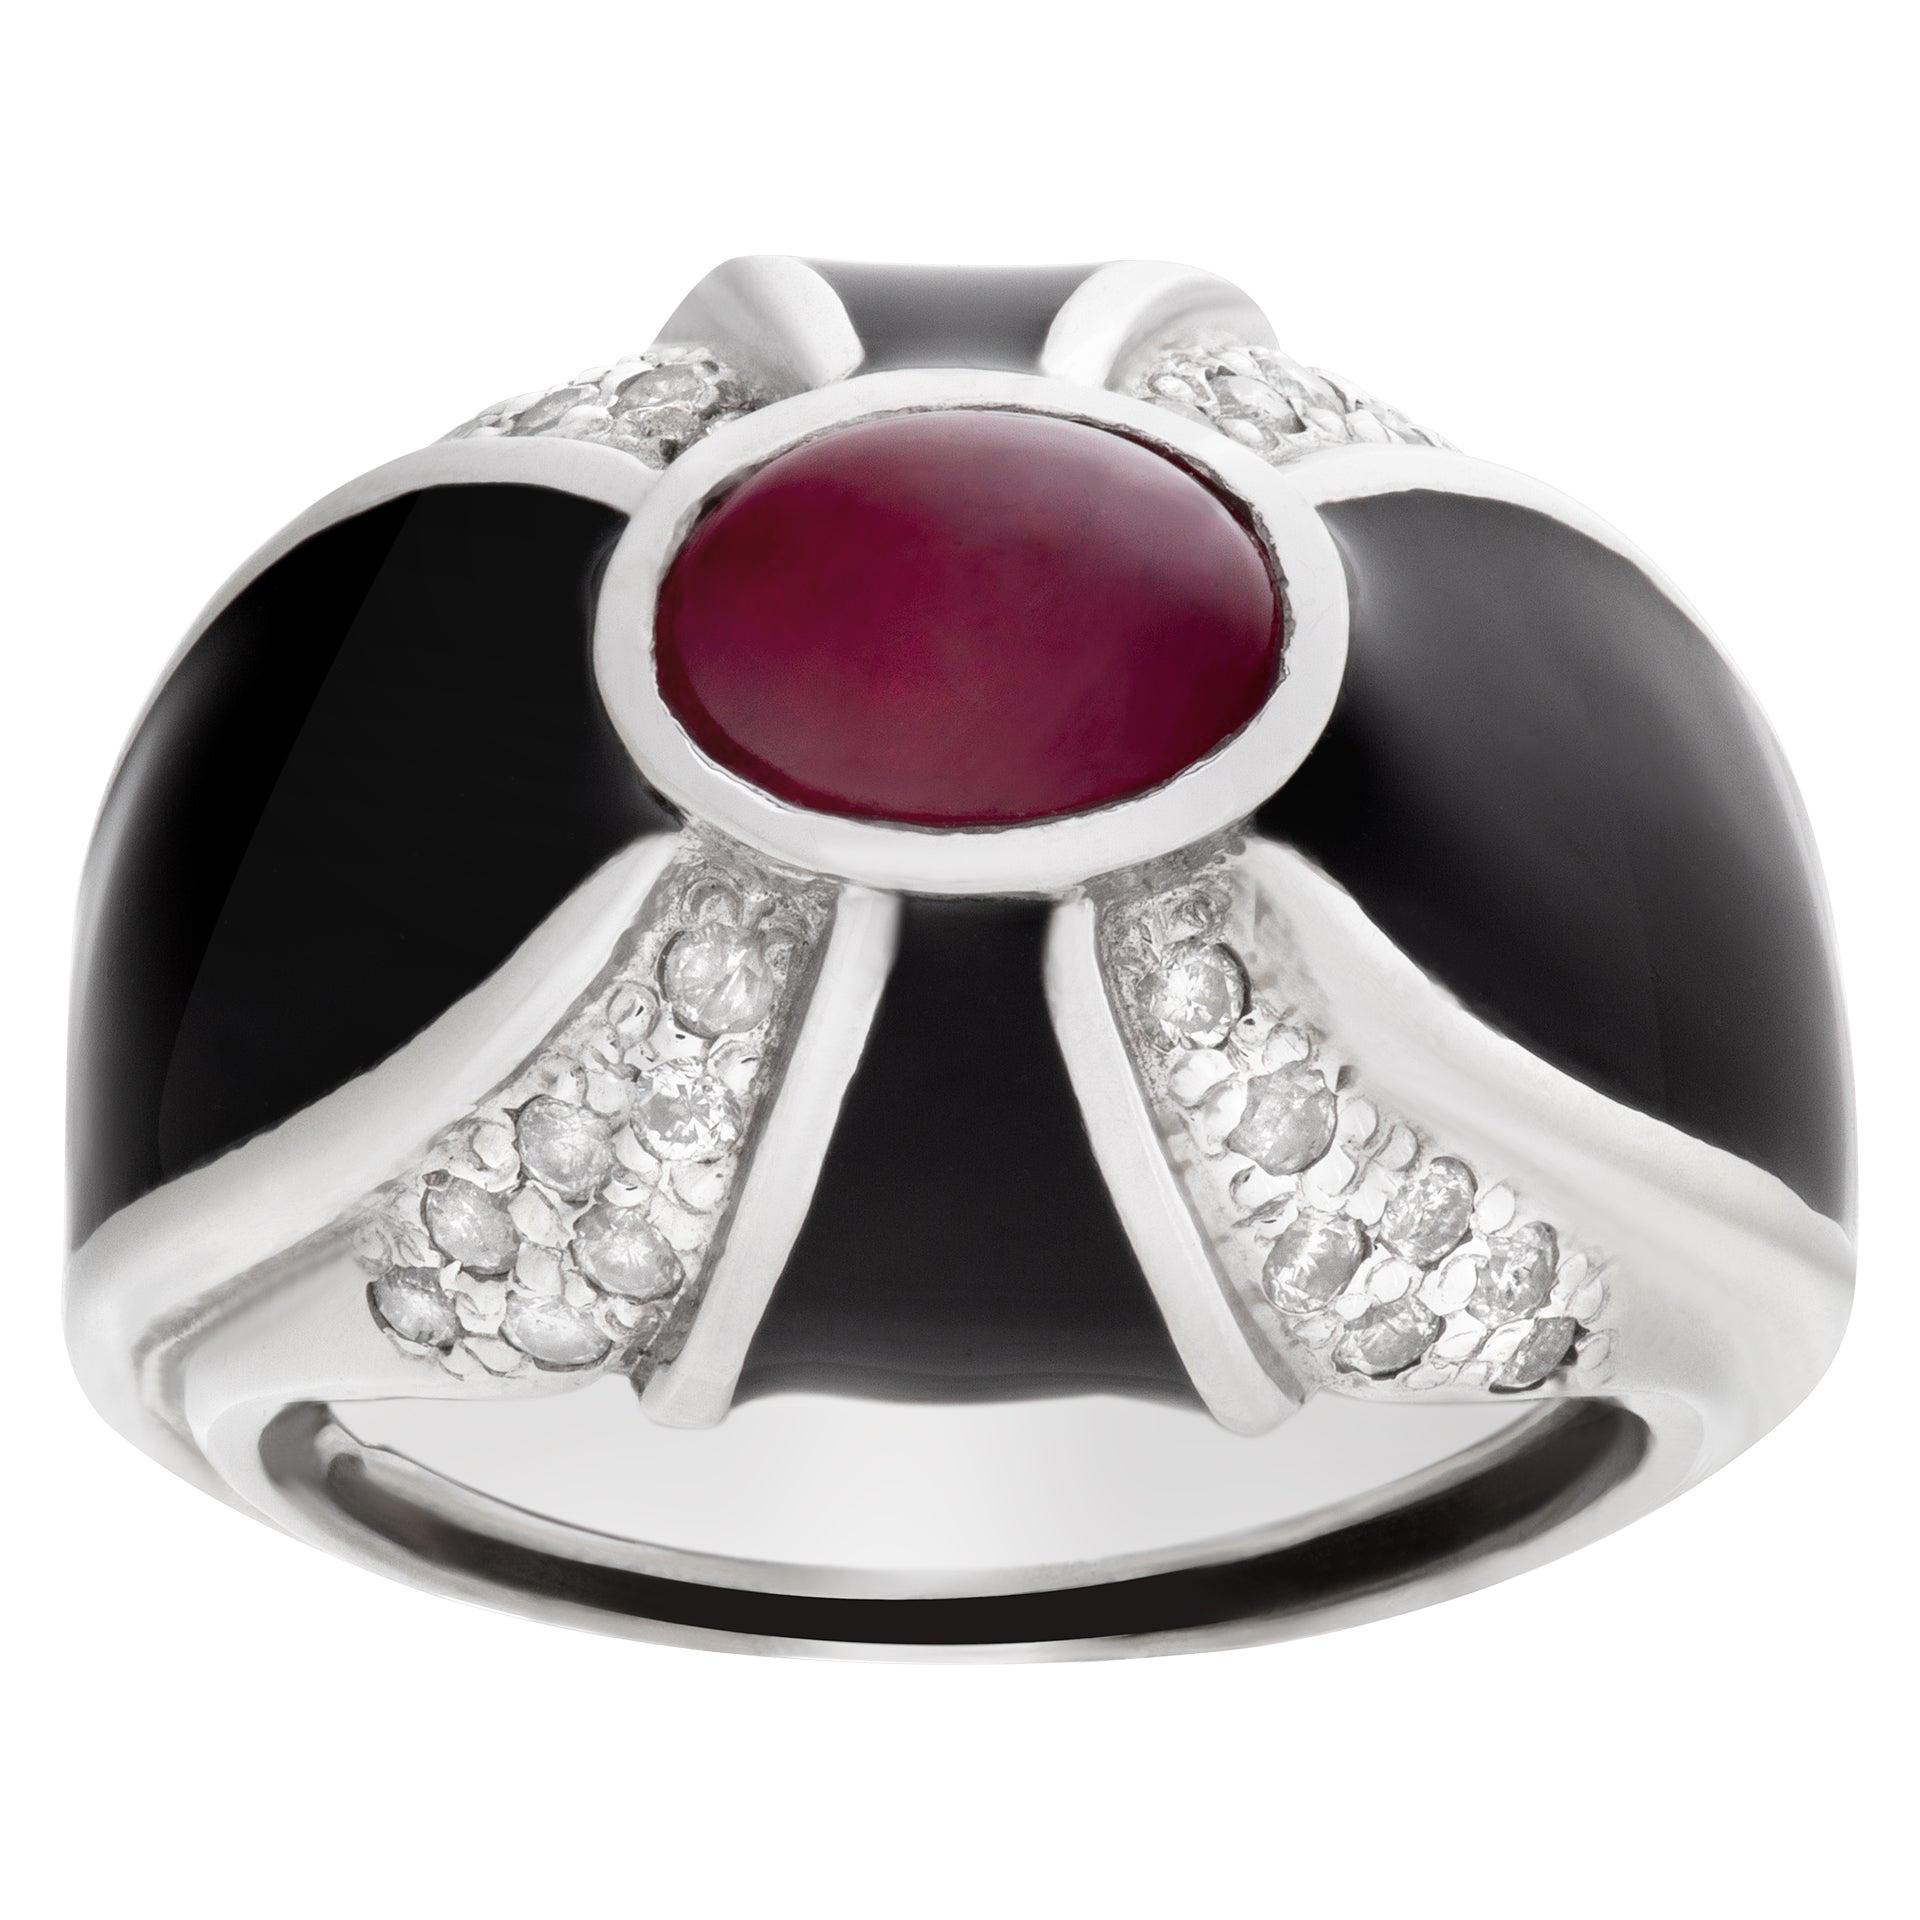 Stunning Cabochon Ruby and Diamond Ring in 14k White Gold with Black Enamel For Sale